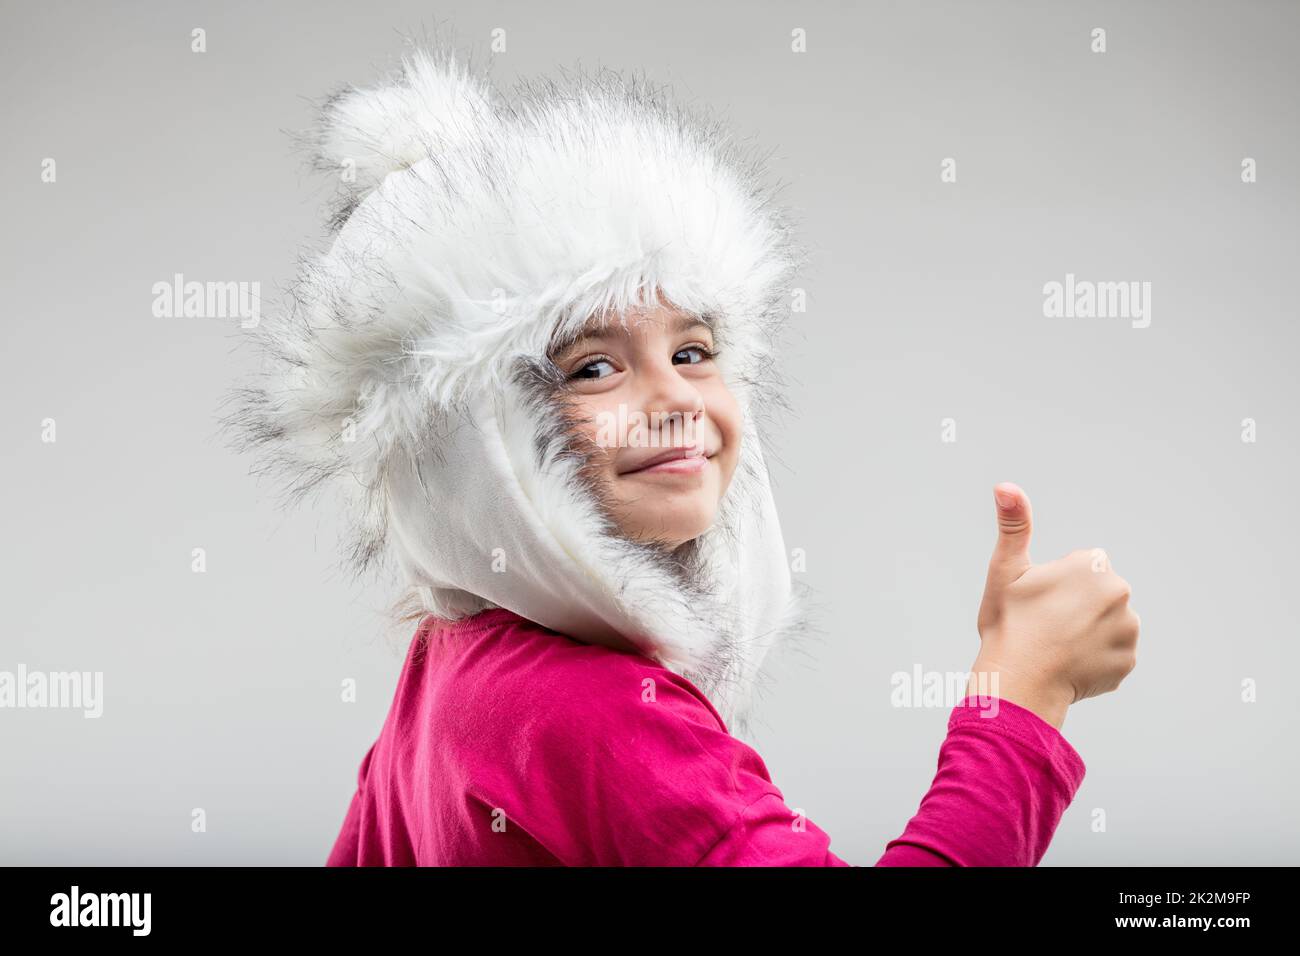 Preteen girl wearing fluffy cap giving thumb up Stock Photo